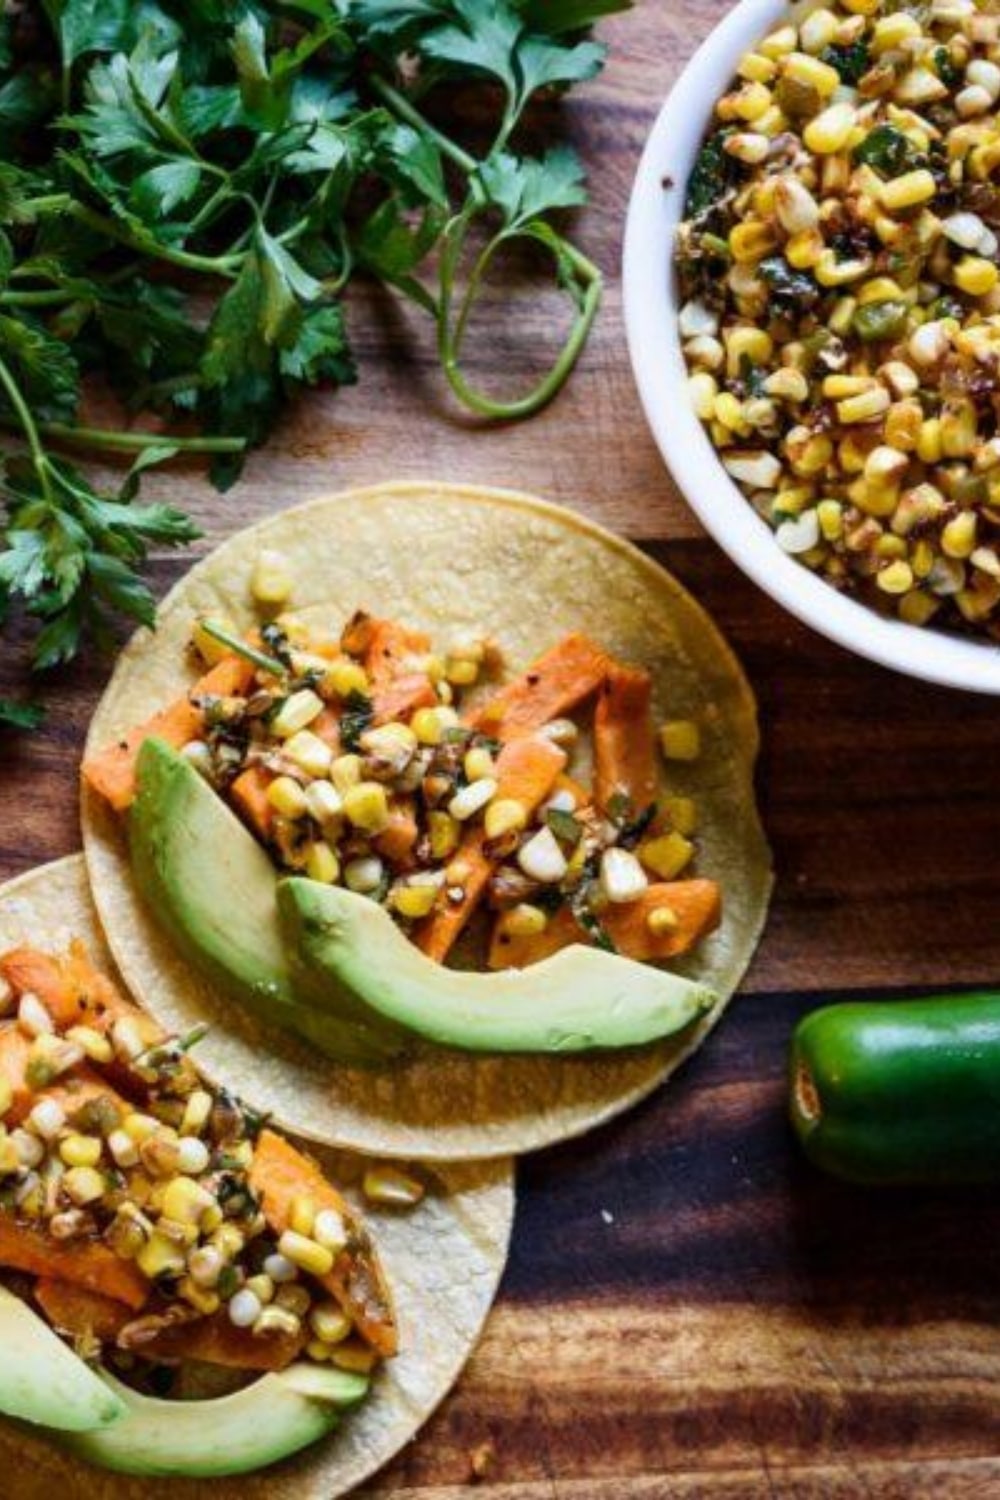 Mexican Street Corn and Roasted Sweet Potato Tacos